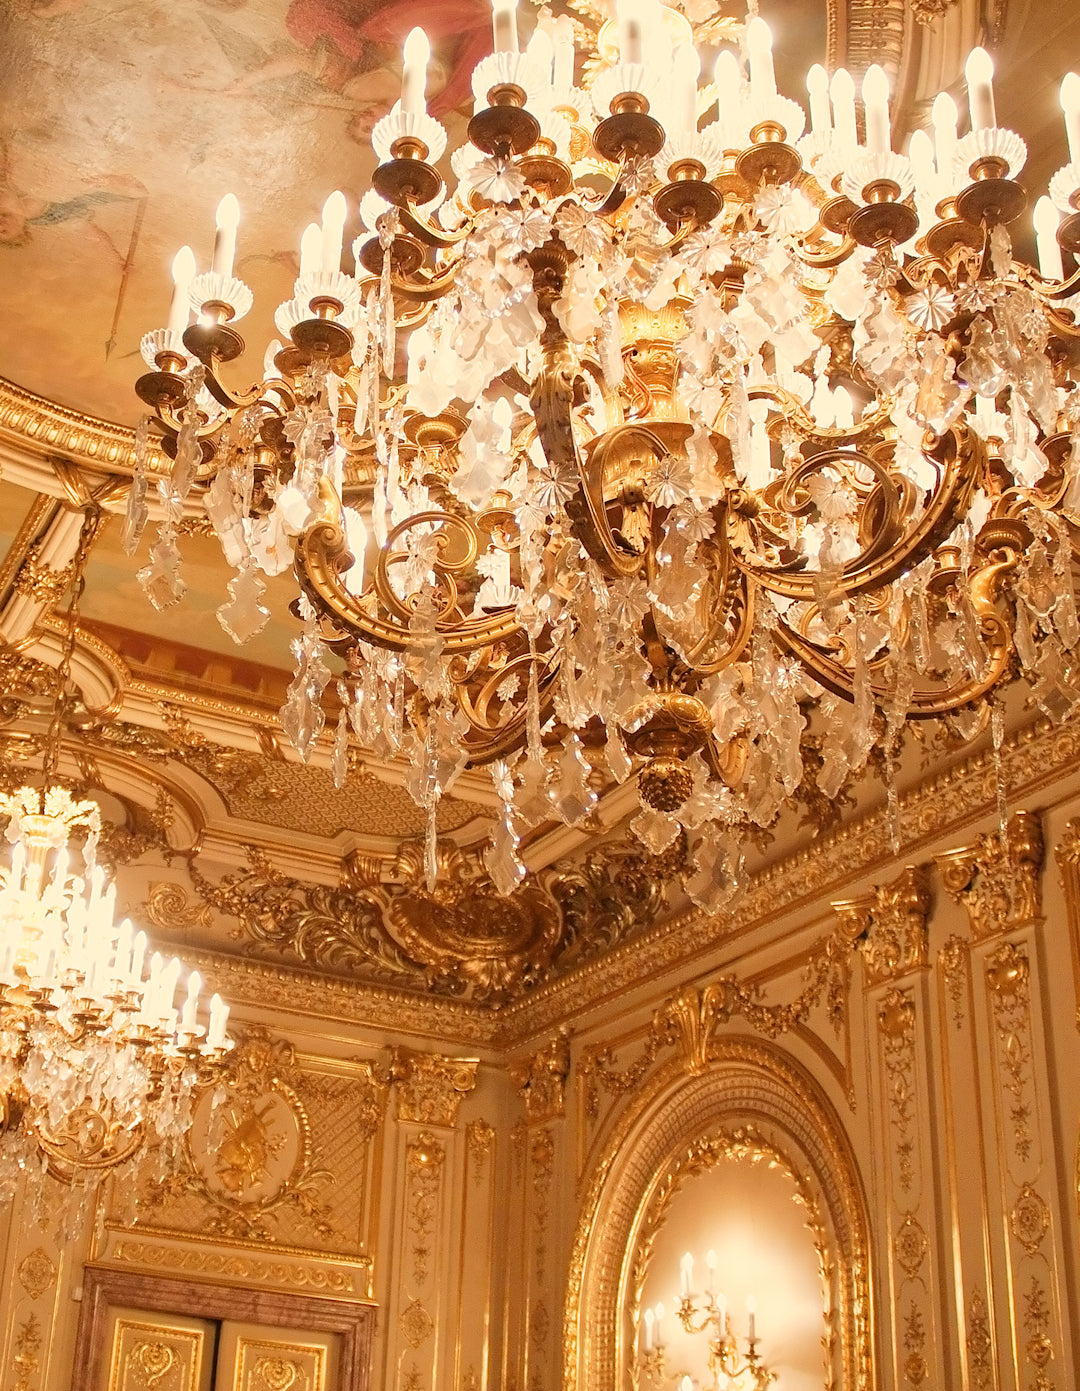 Picture showing multiple chandeliers in a stately home